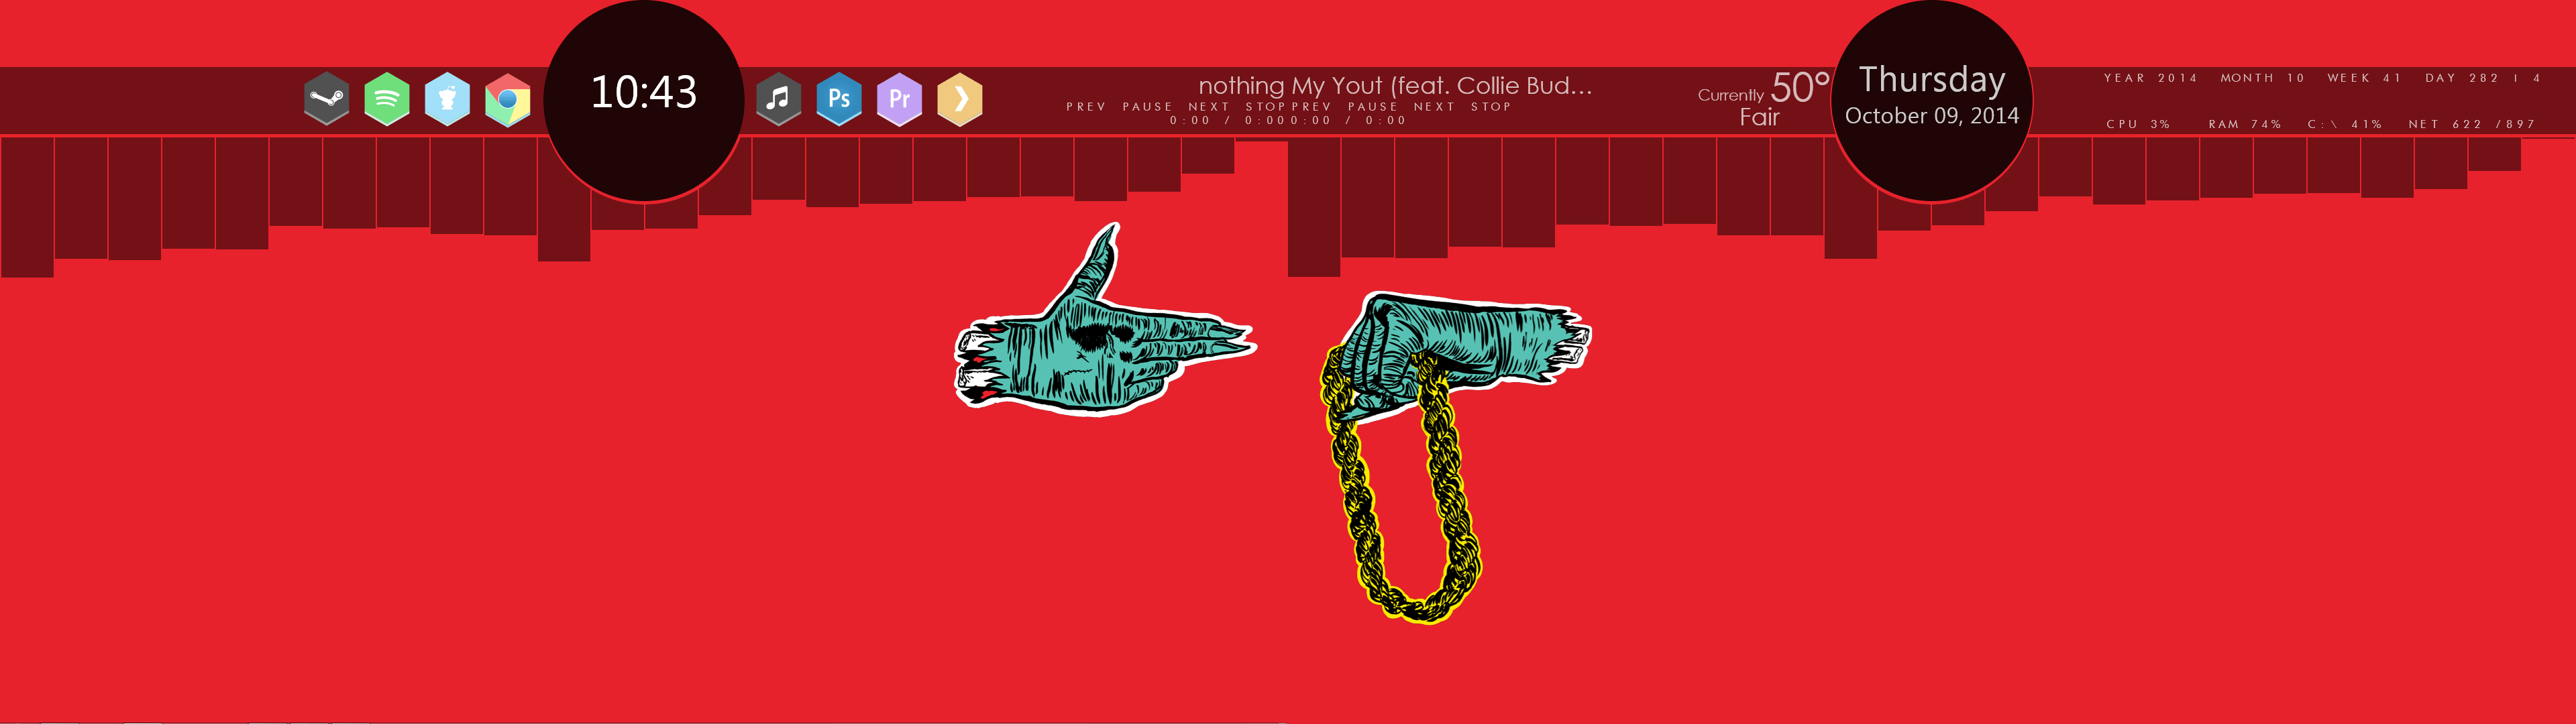 Run The Jewels 3 Wallpapers